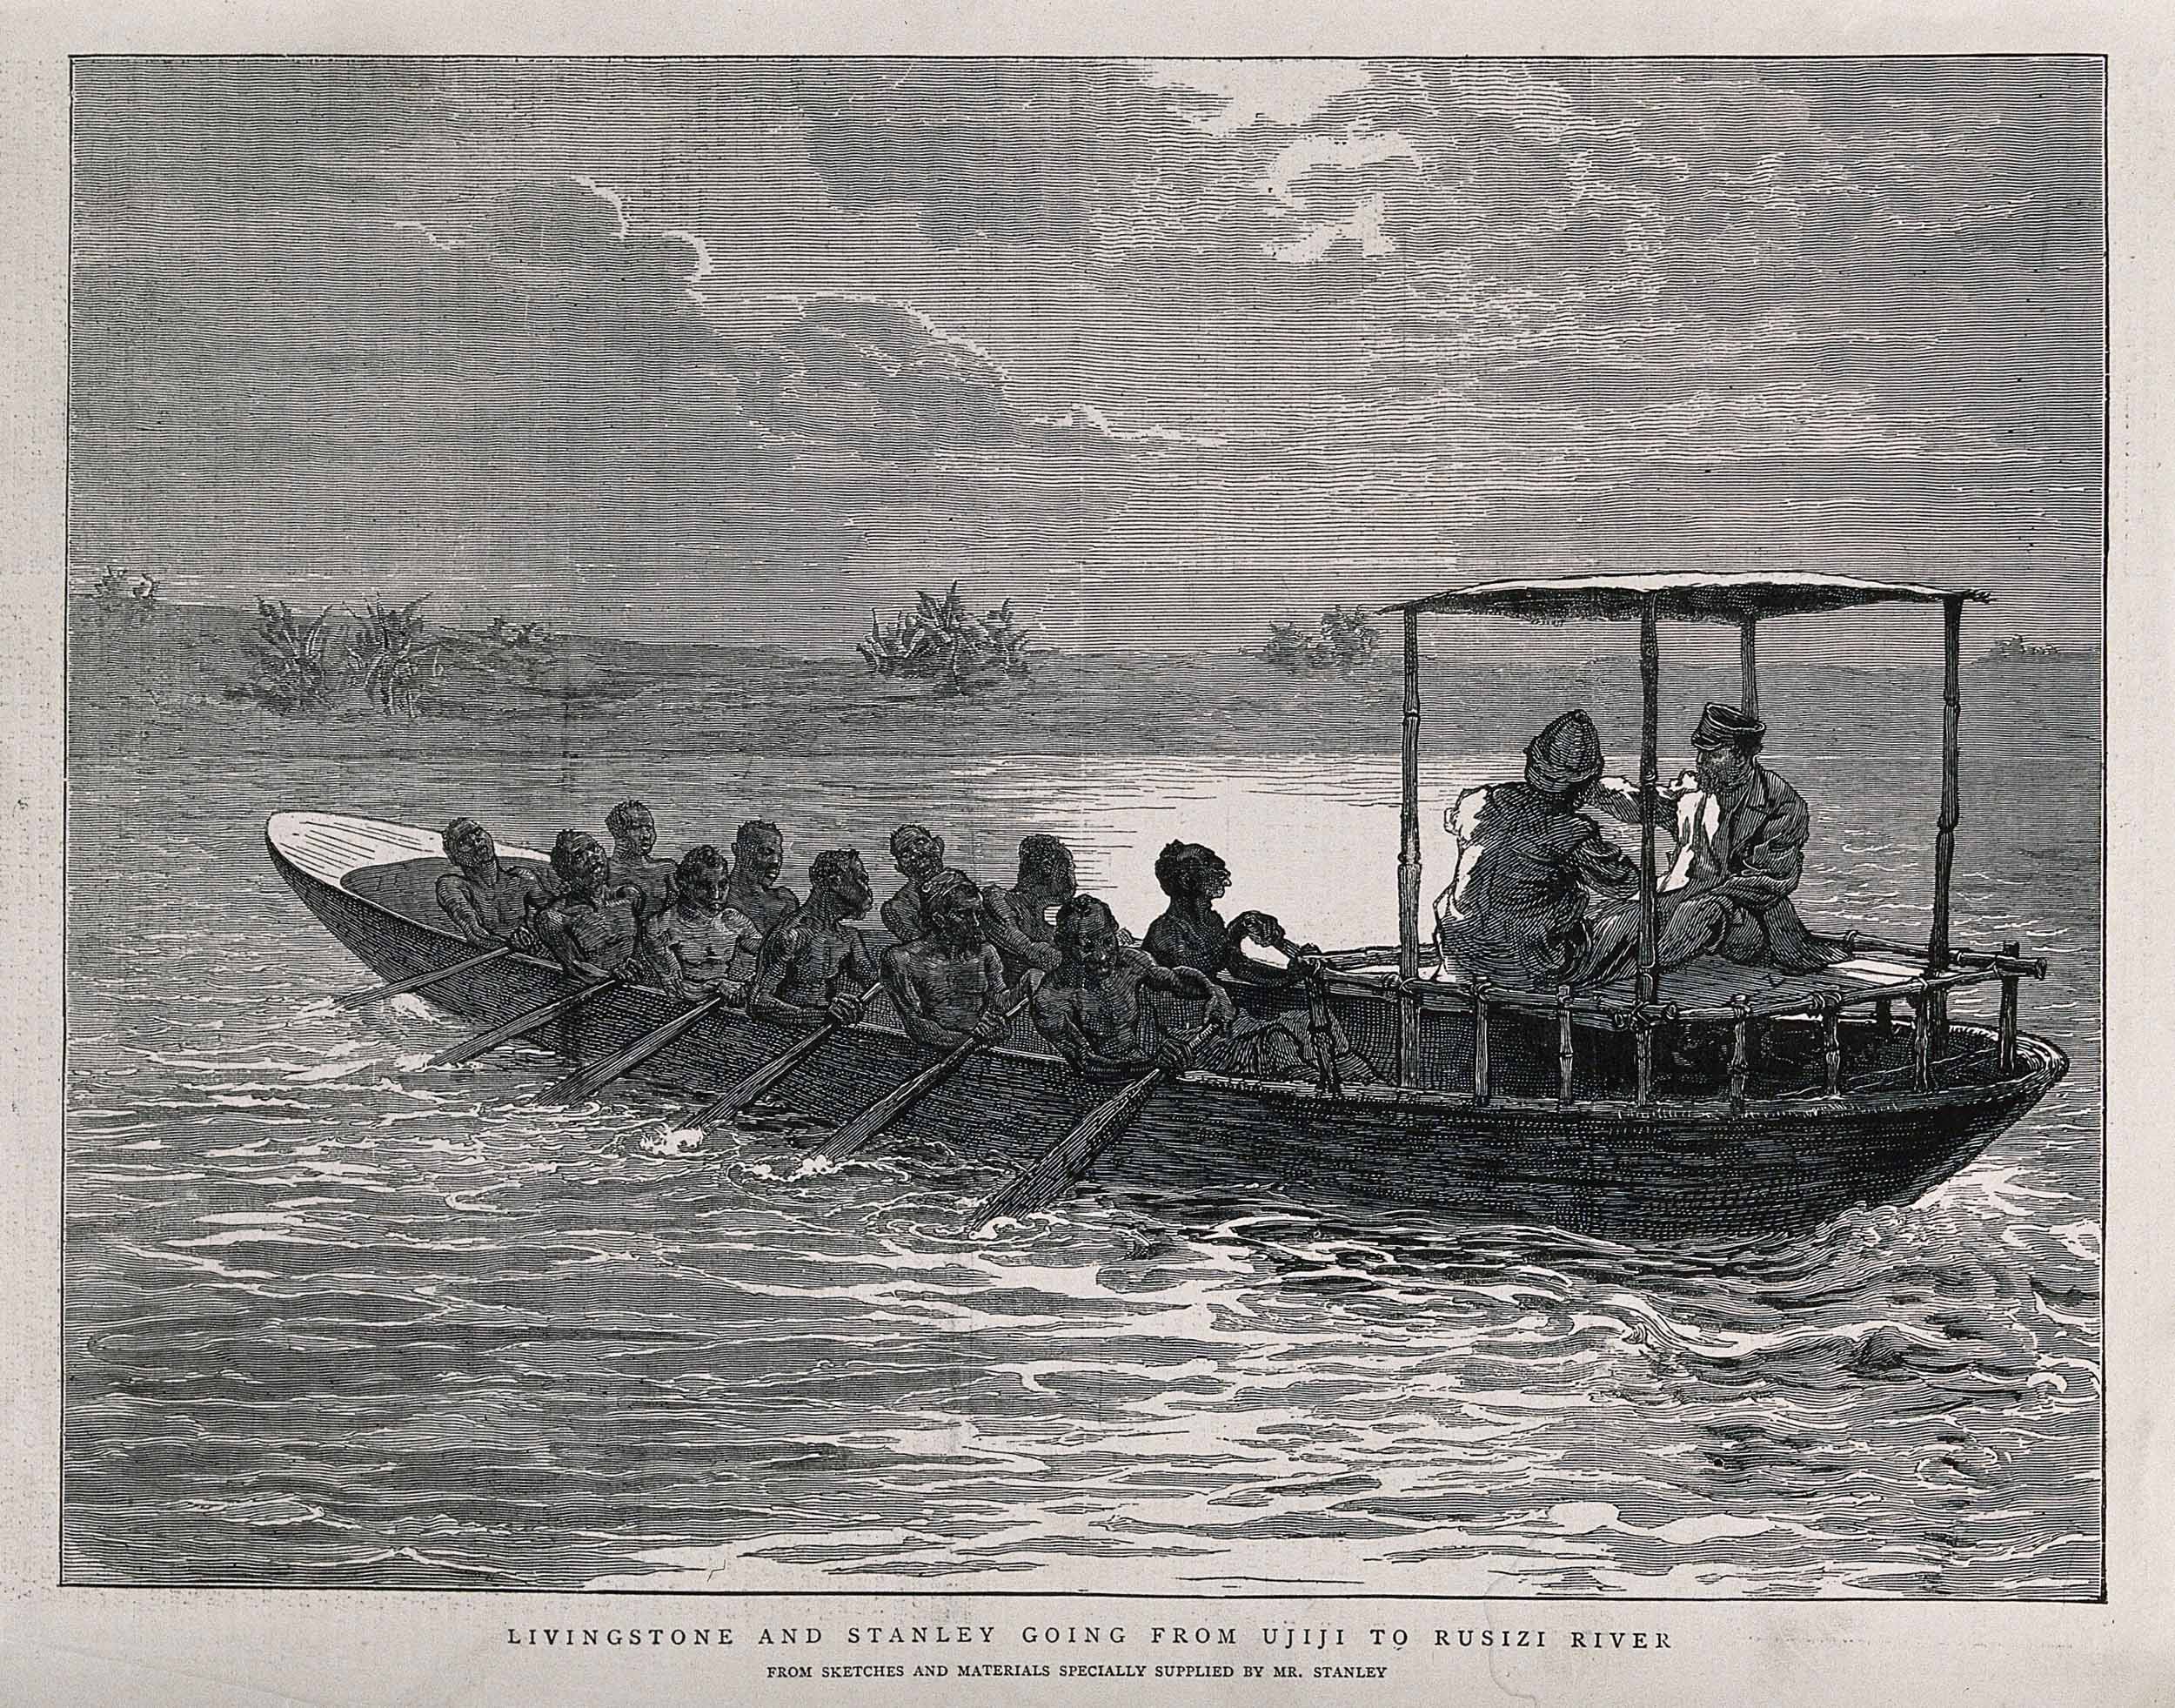 Livingstone and Stanley going from Ujiji to Rusizi River. Copyright Wellcome Library, London. Creative Commons Attribution 4.0 International (https://creativecommons.org/licenses/by/4.0/).